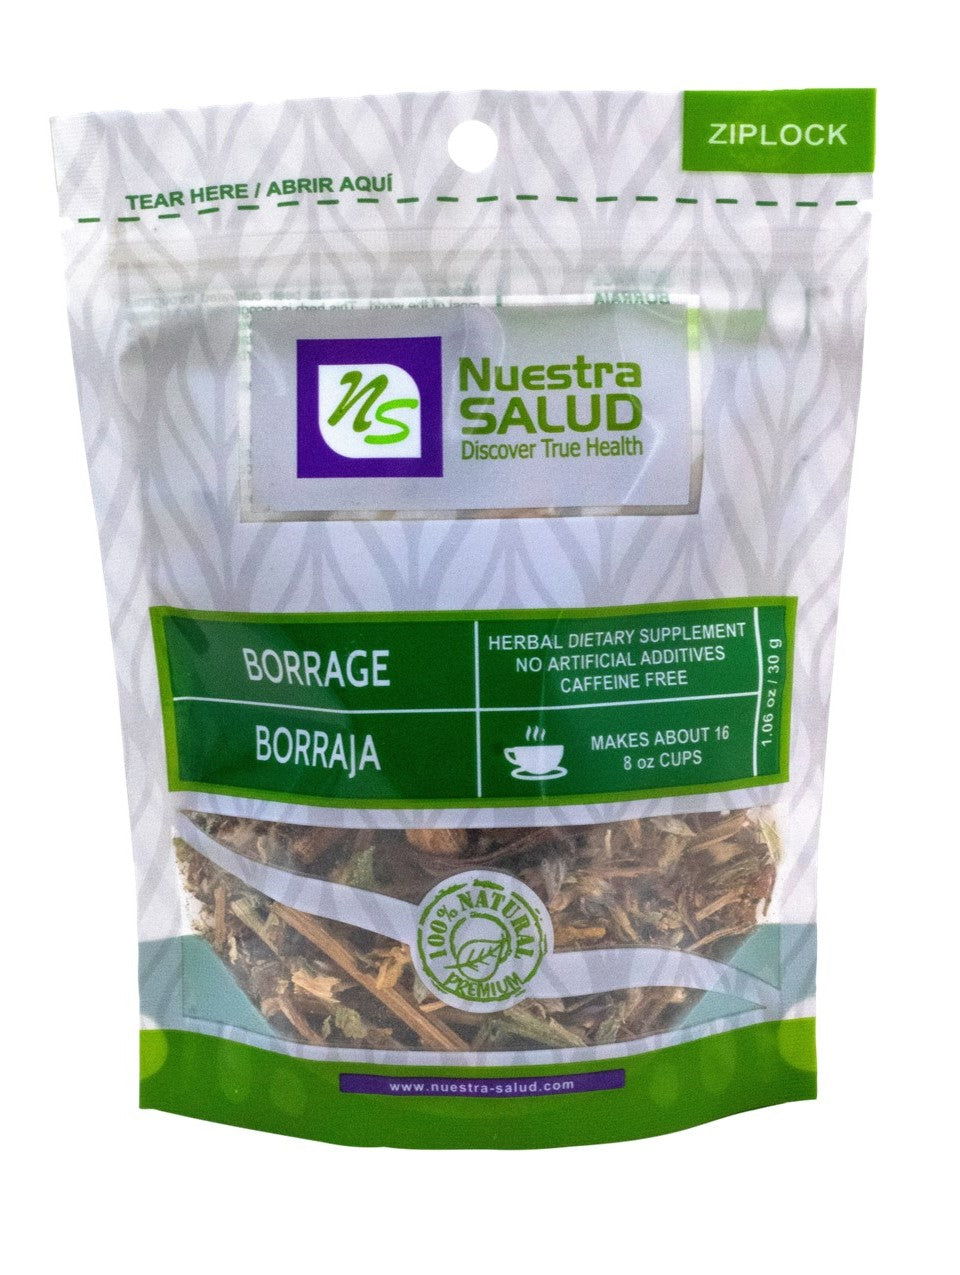  Borraja Borage Loose Herbal Infusion Tea Value Pack (90g) by Nuestra Salud sold by NS Herbs Co.